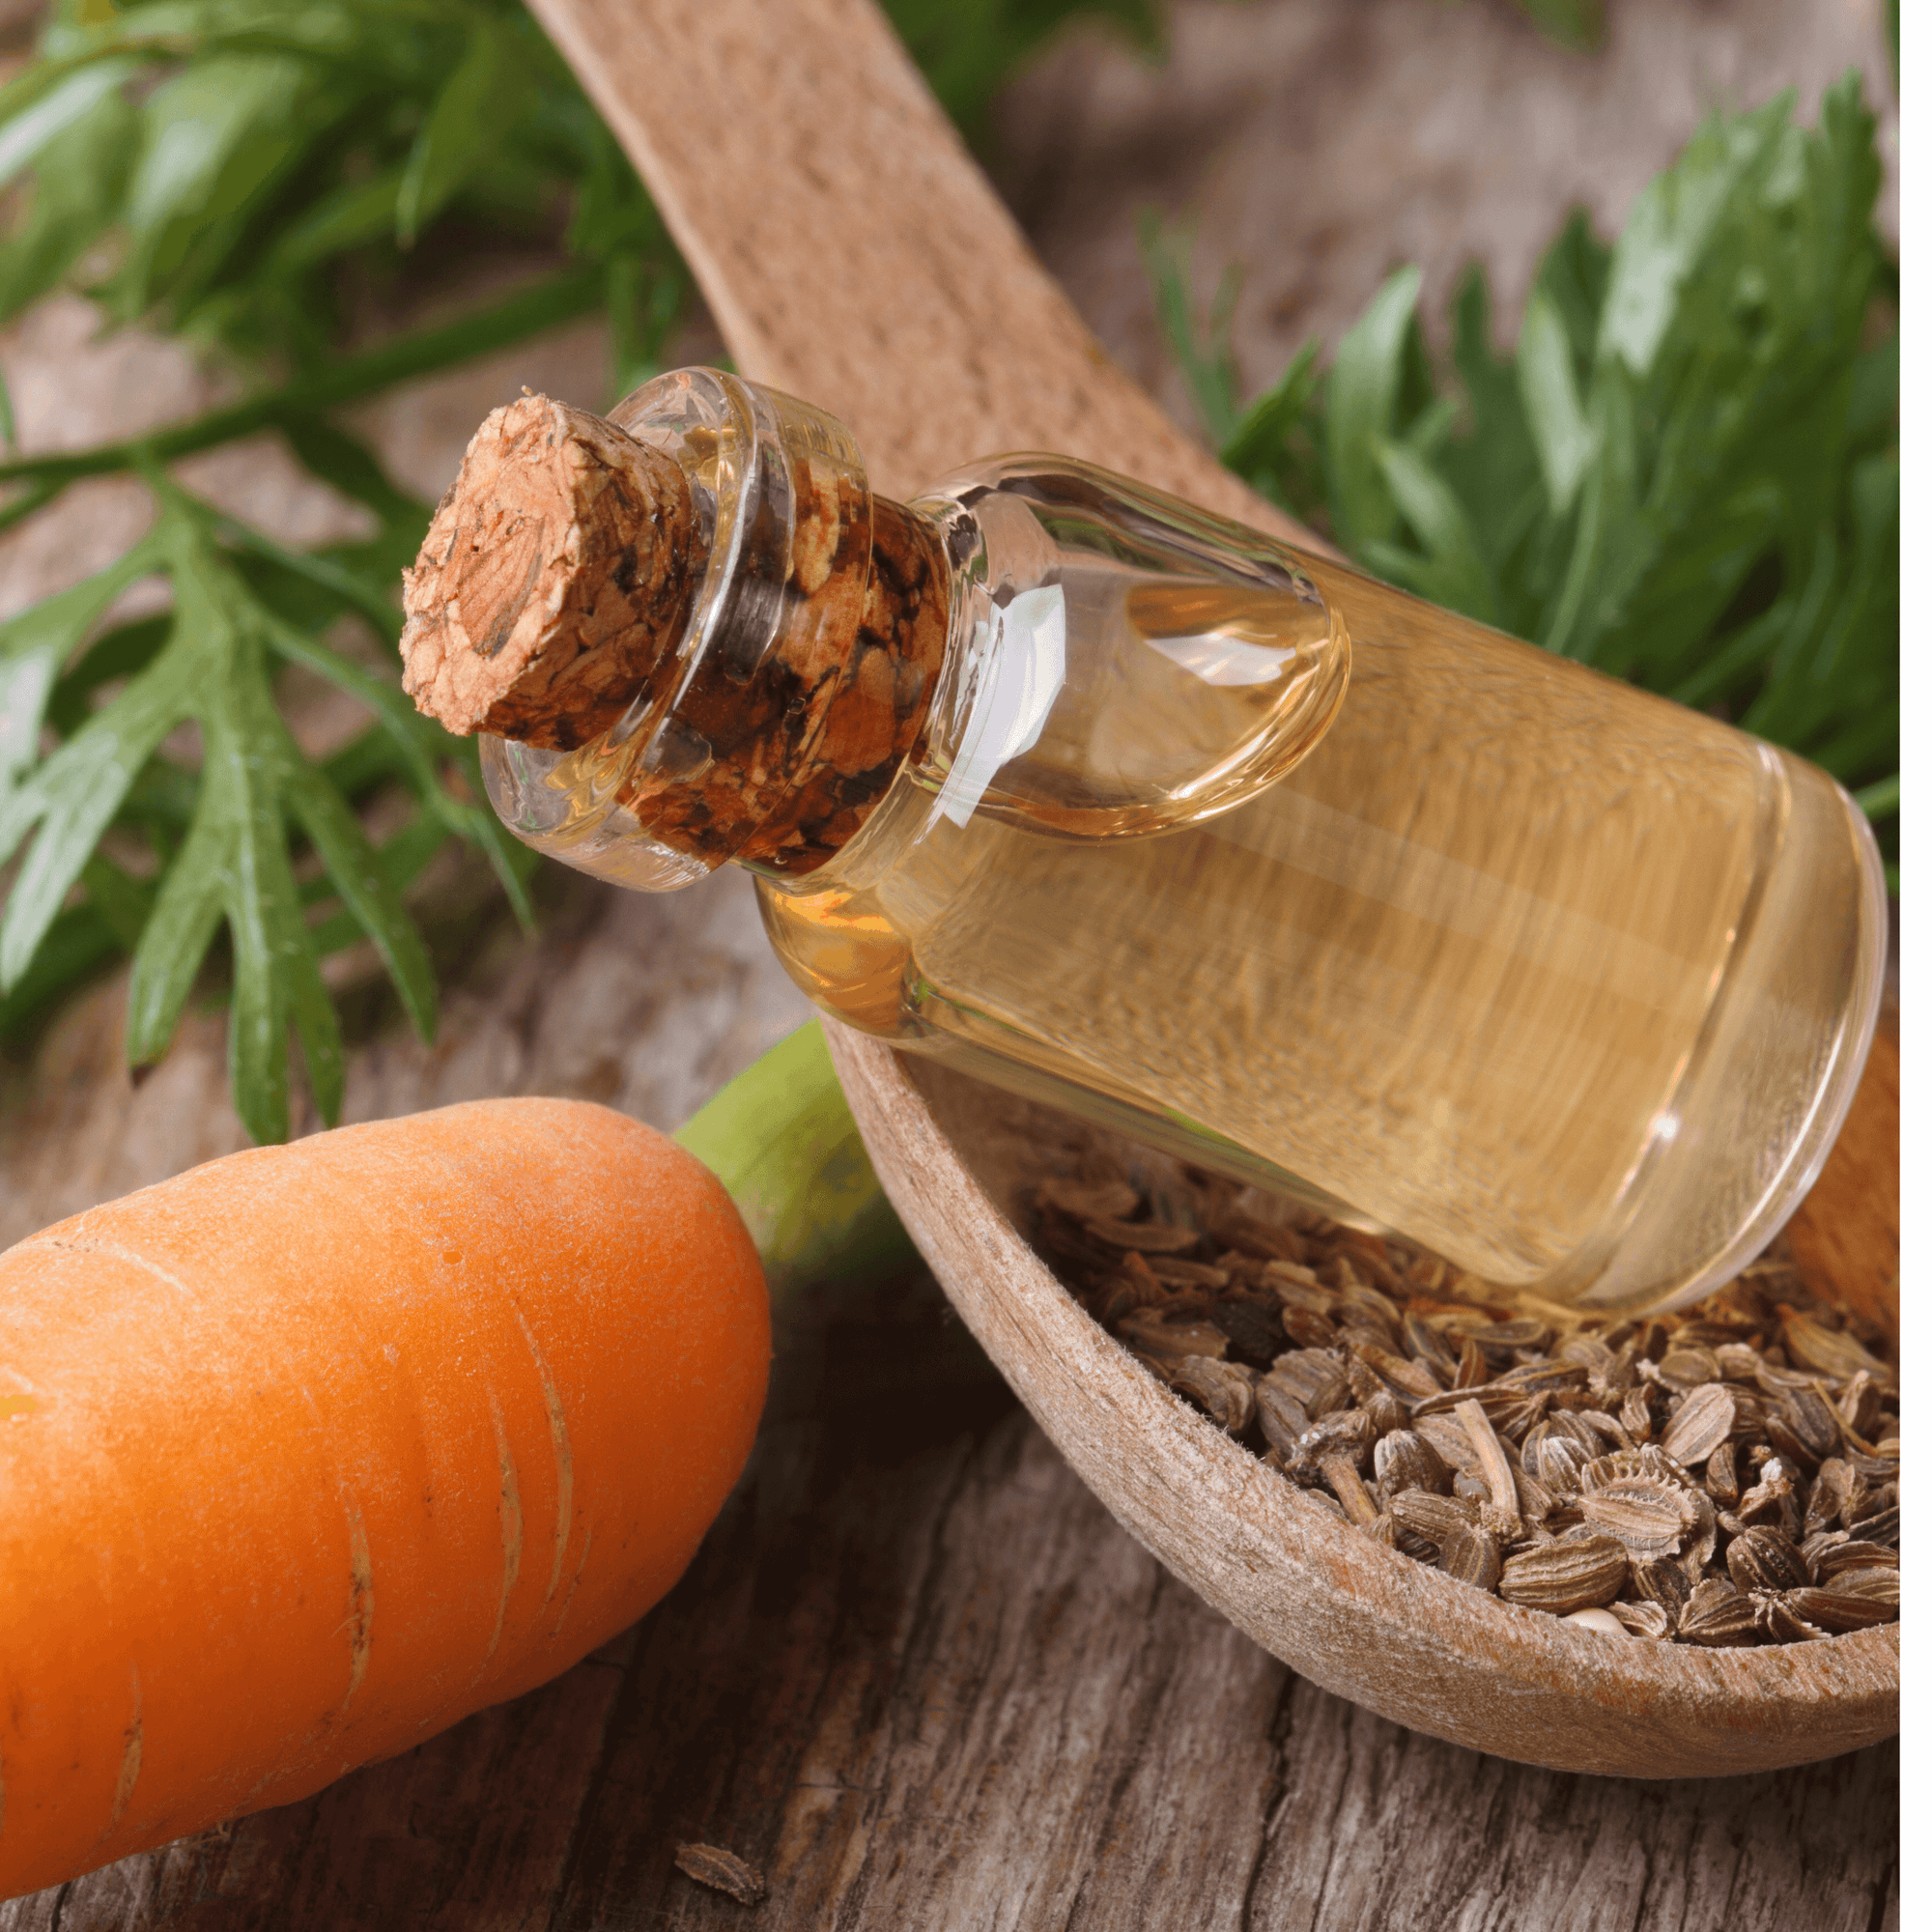 Be Bohemian Botanical Sea Serum Carrot Seed Oil. A see-through, corked glass bottle filled with carrot oil sits inside a wooden spoon angled towards a bright orange carrot.